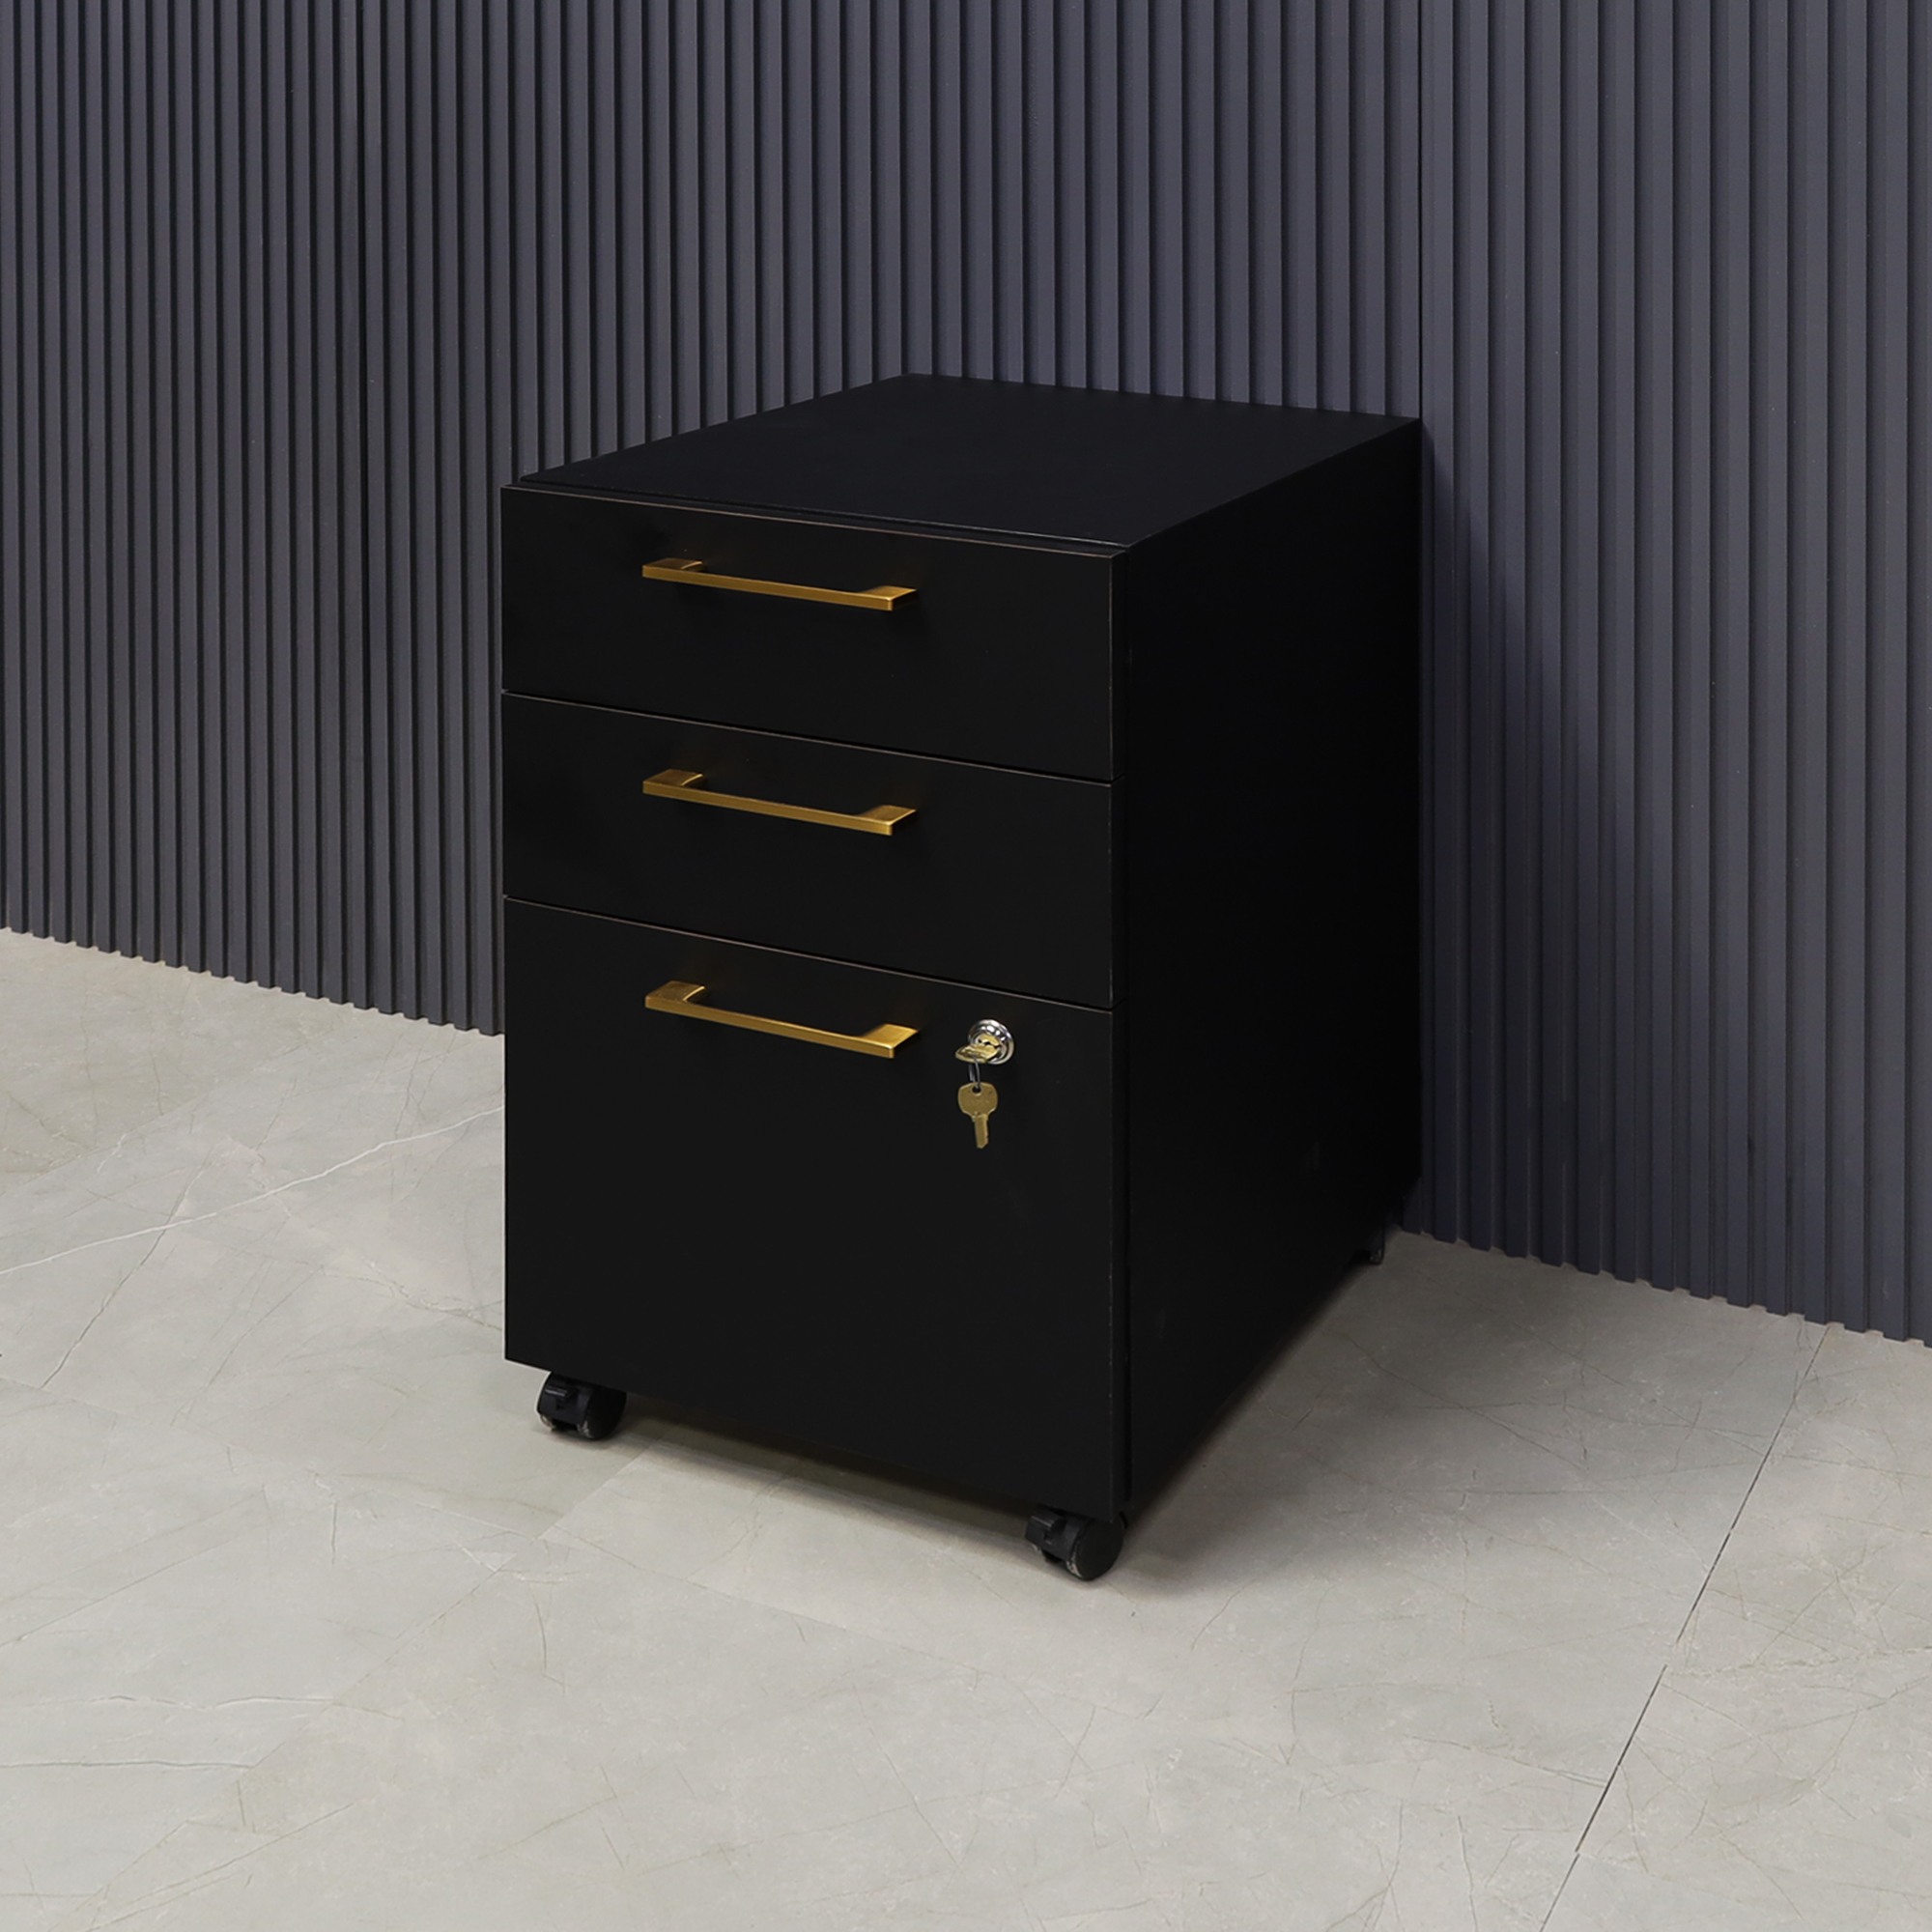 Naples Custom Mobile Storage Cabinet in black matte laminate and lock on third drawer, shown here.